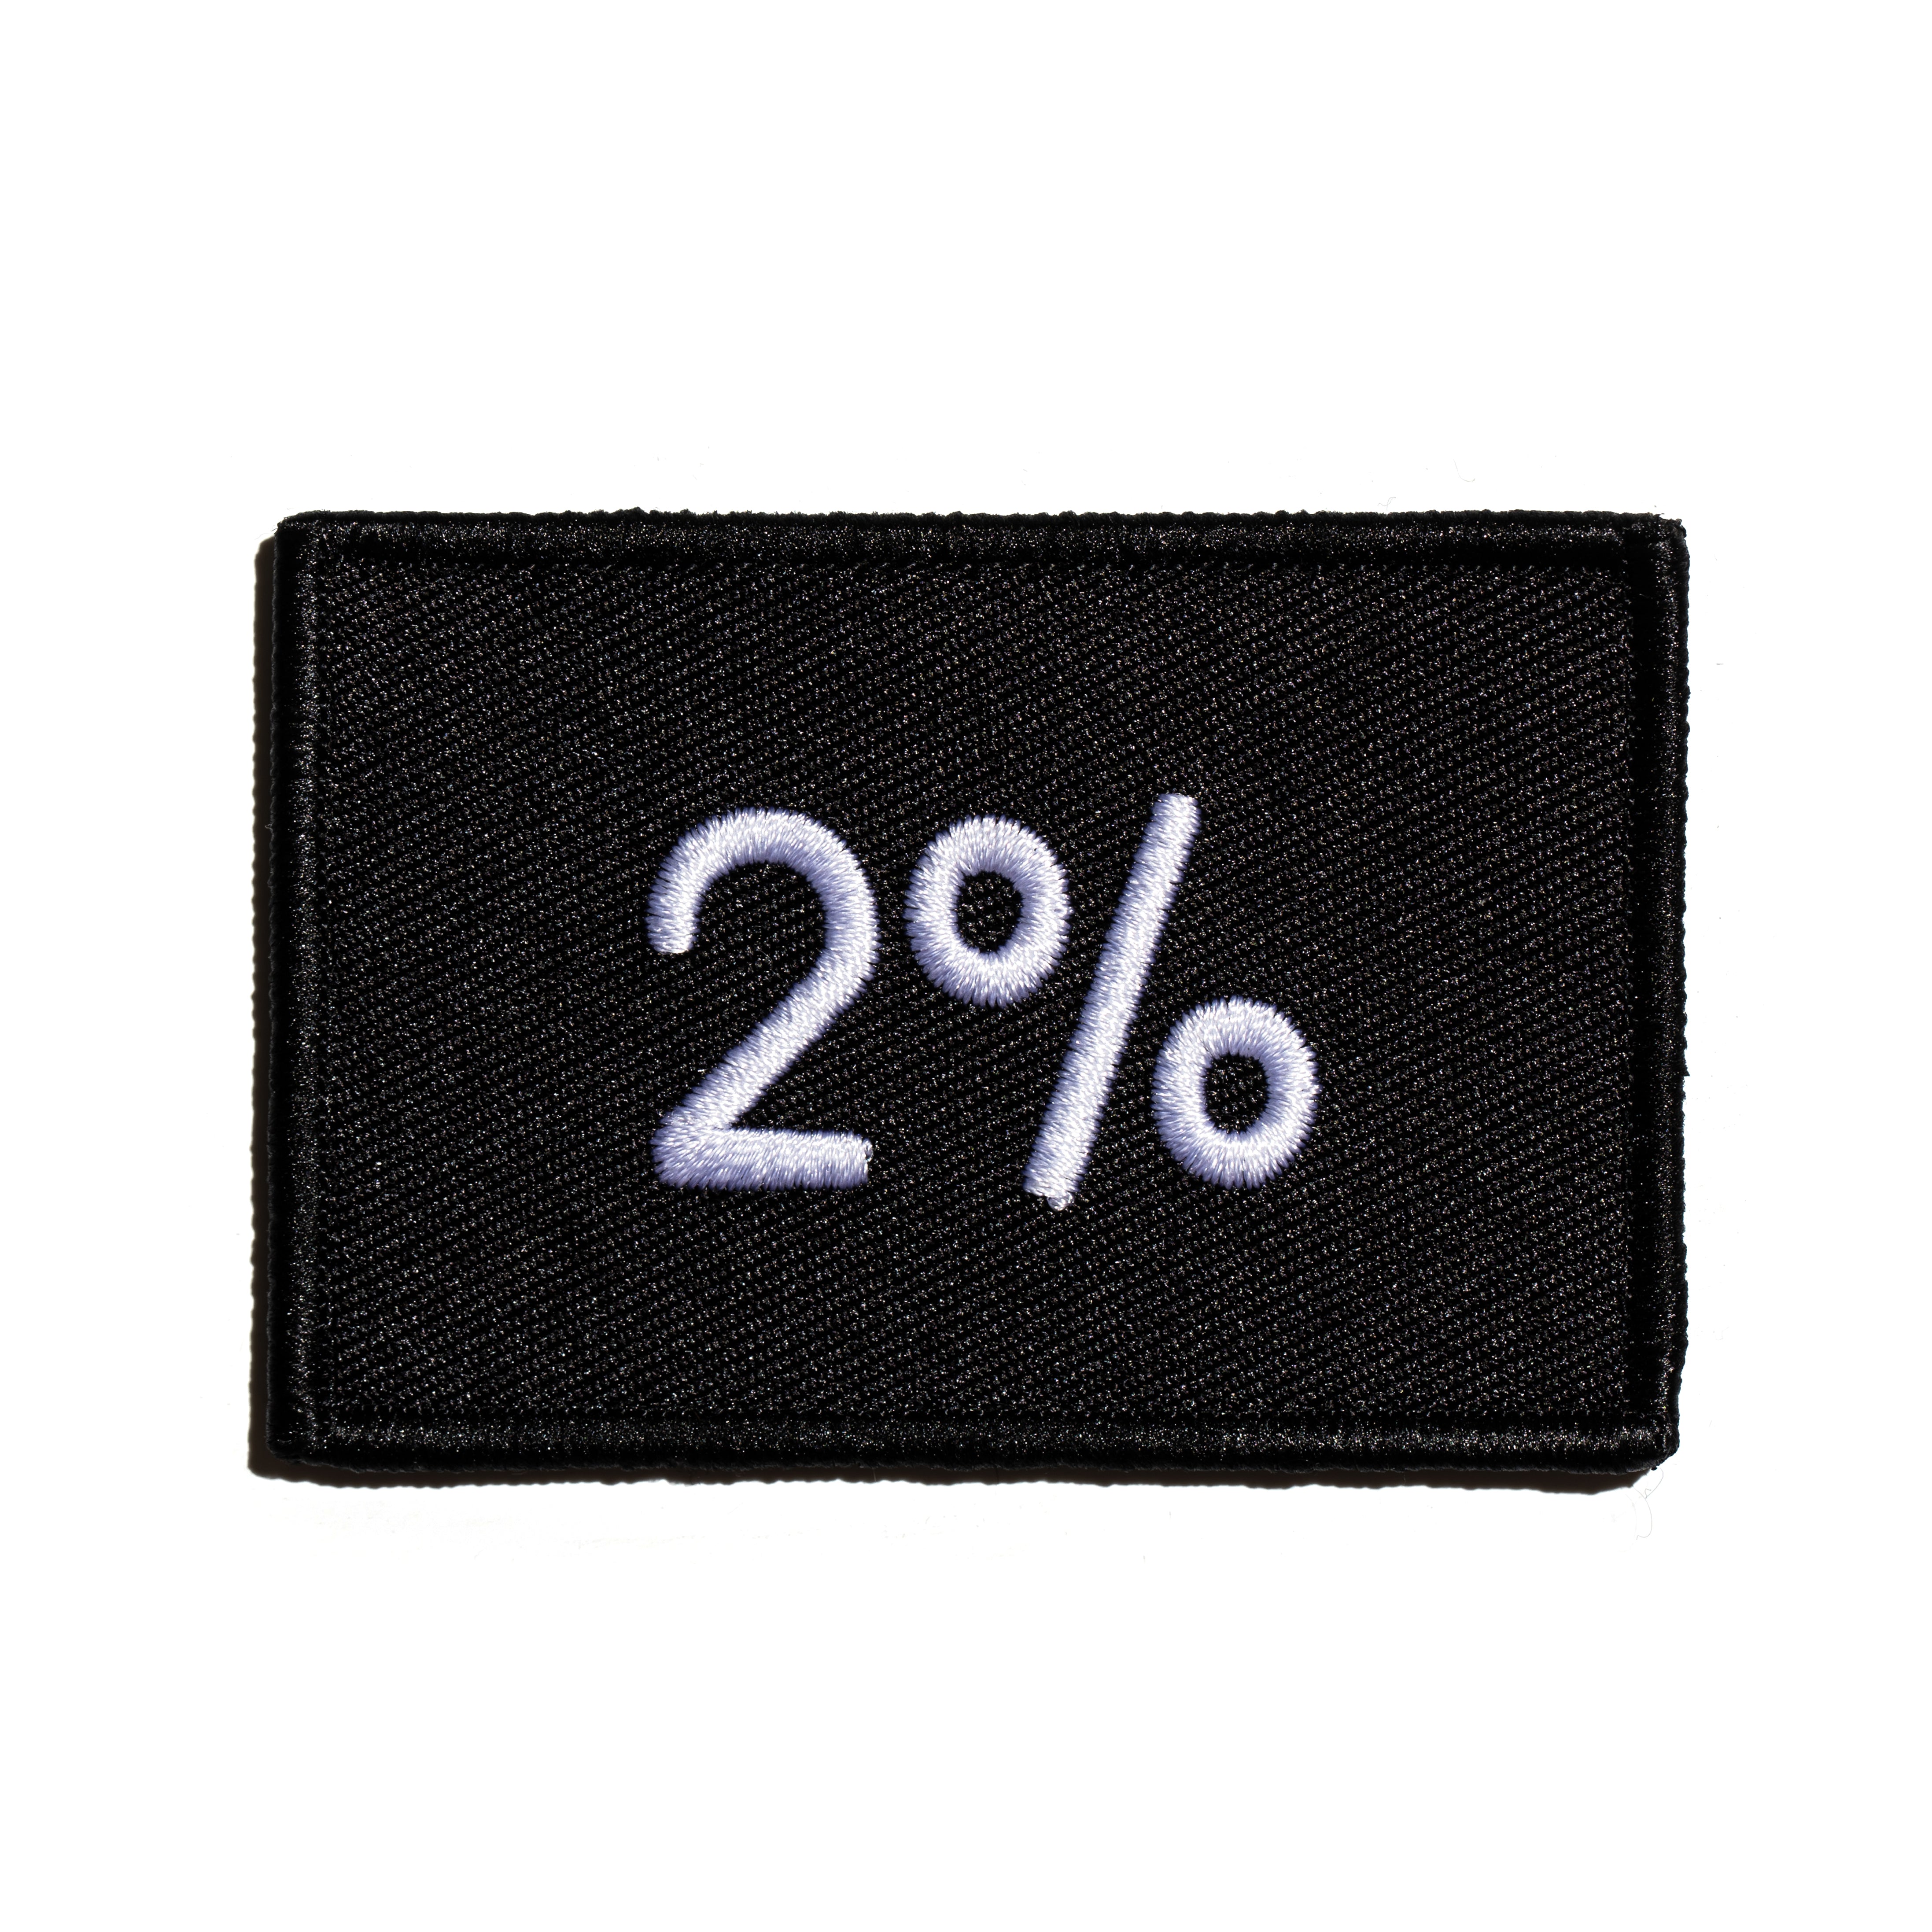 2% Ruck Patch